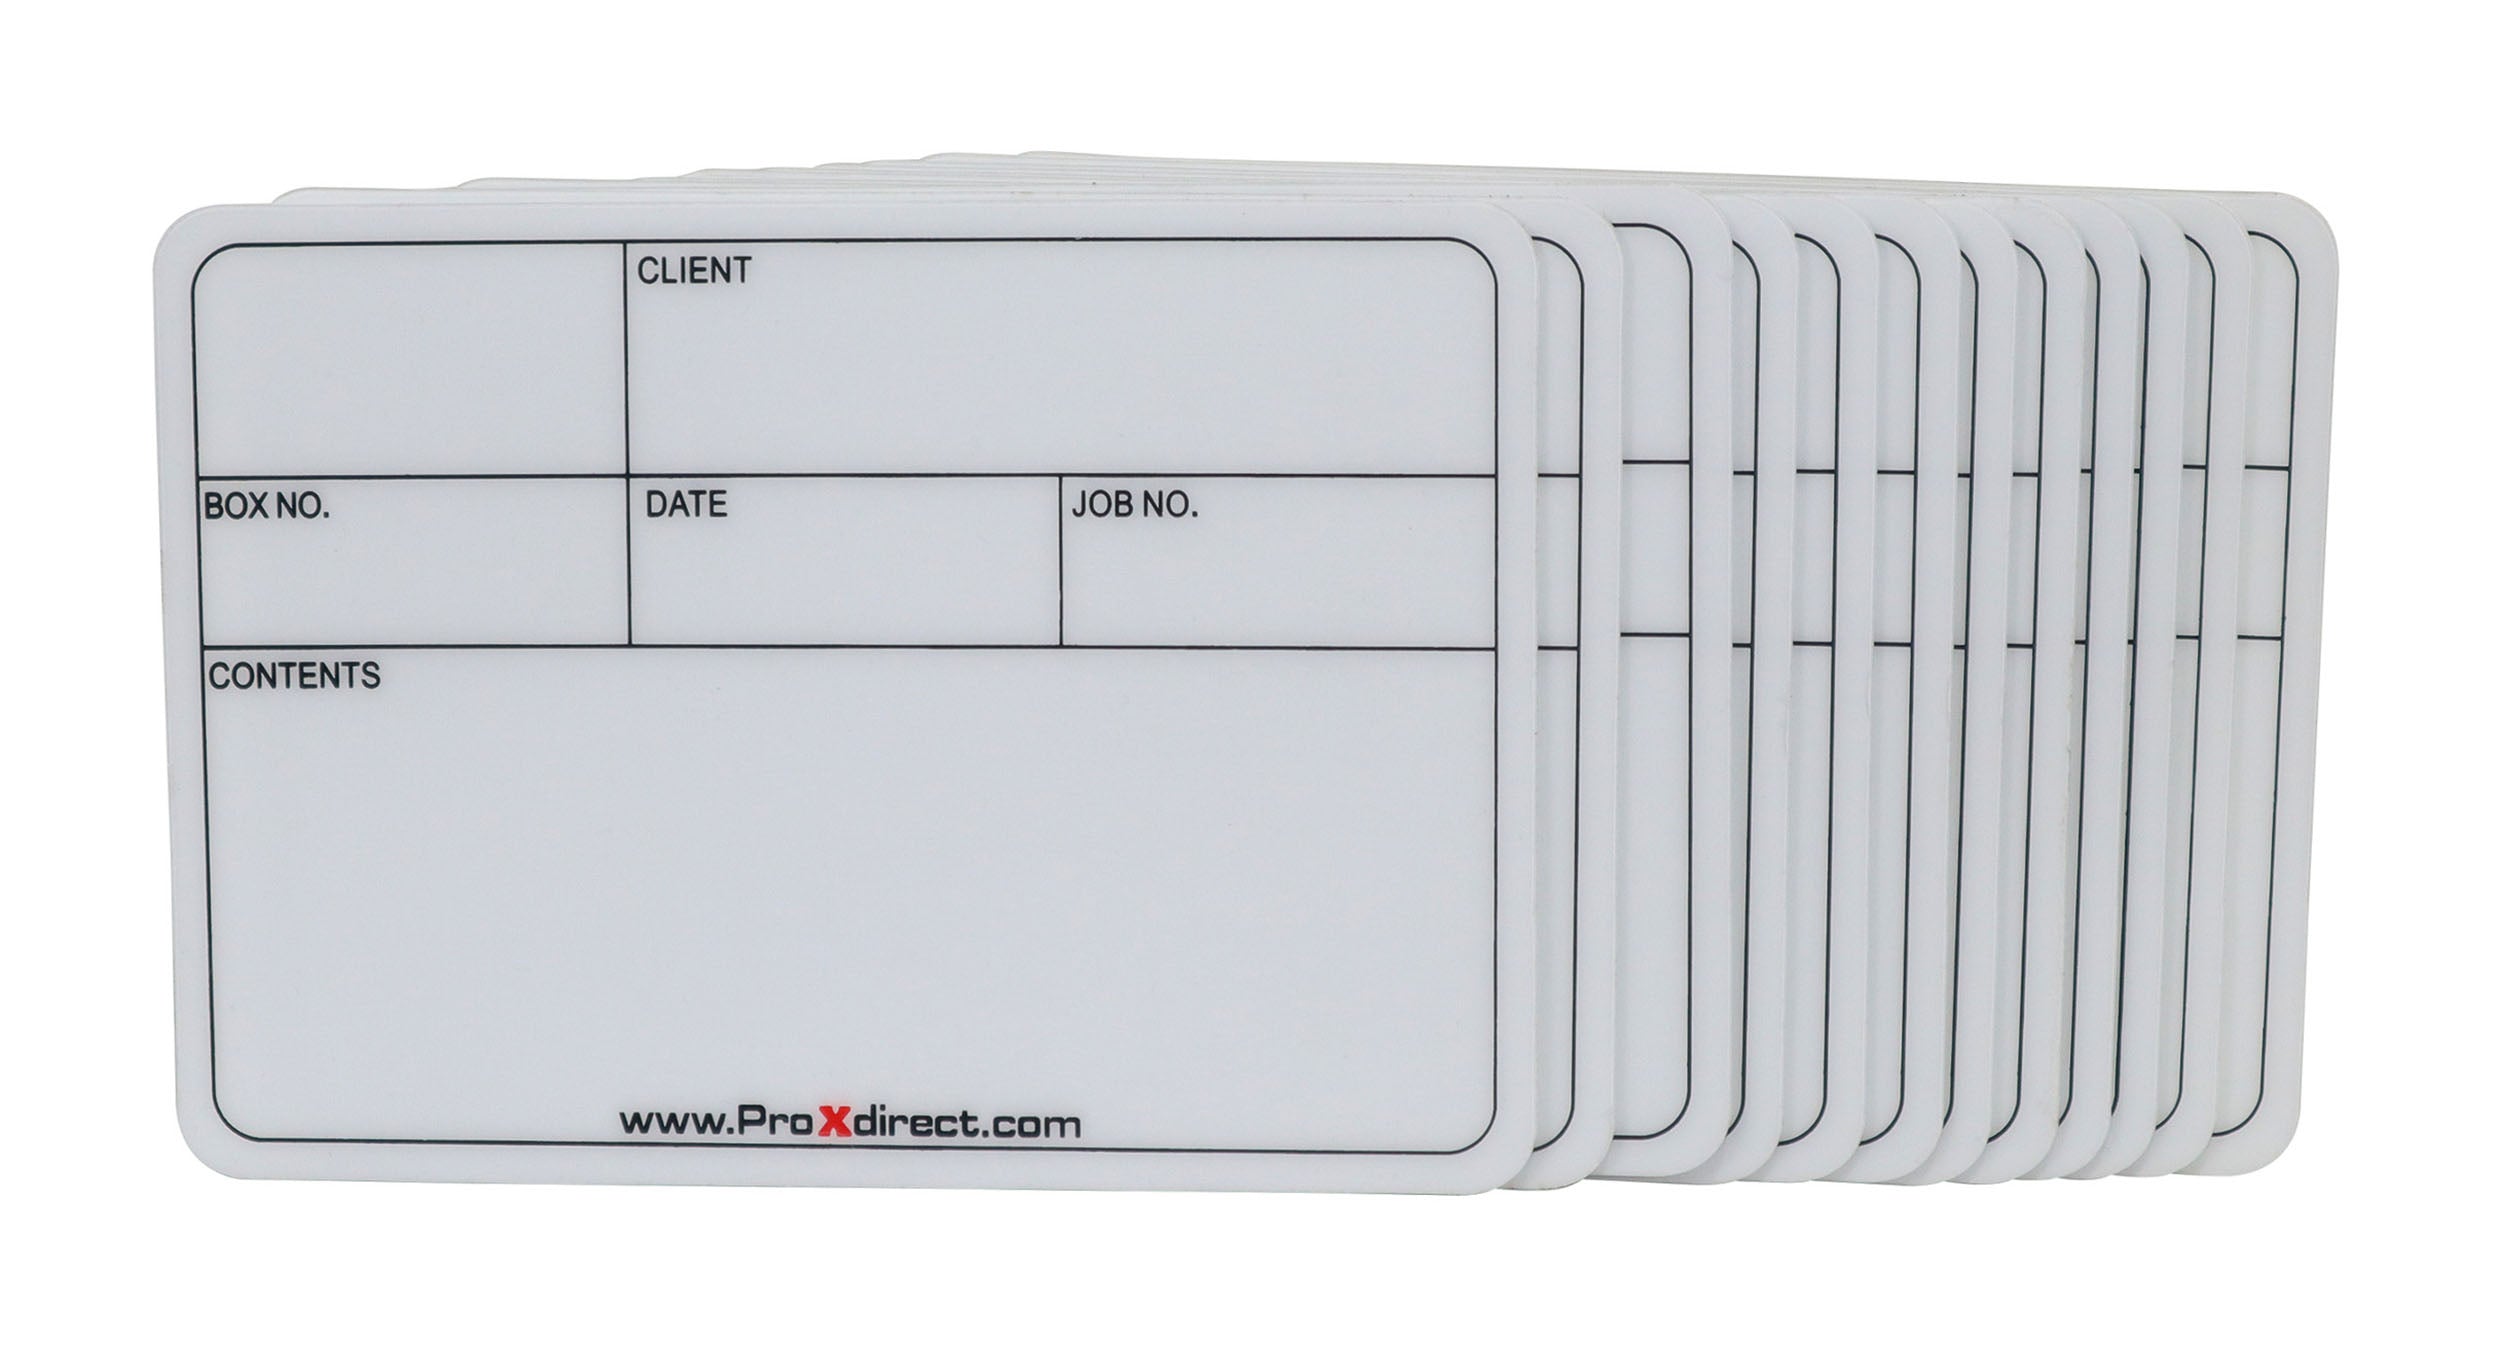 ProX X-CLABELLGX12, 12 Pack of Large Multipurpose Labels for Flight Cases by ProX Cases